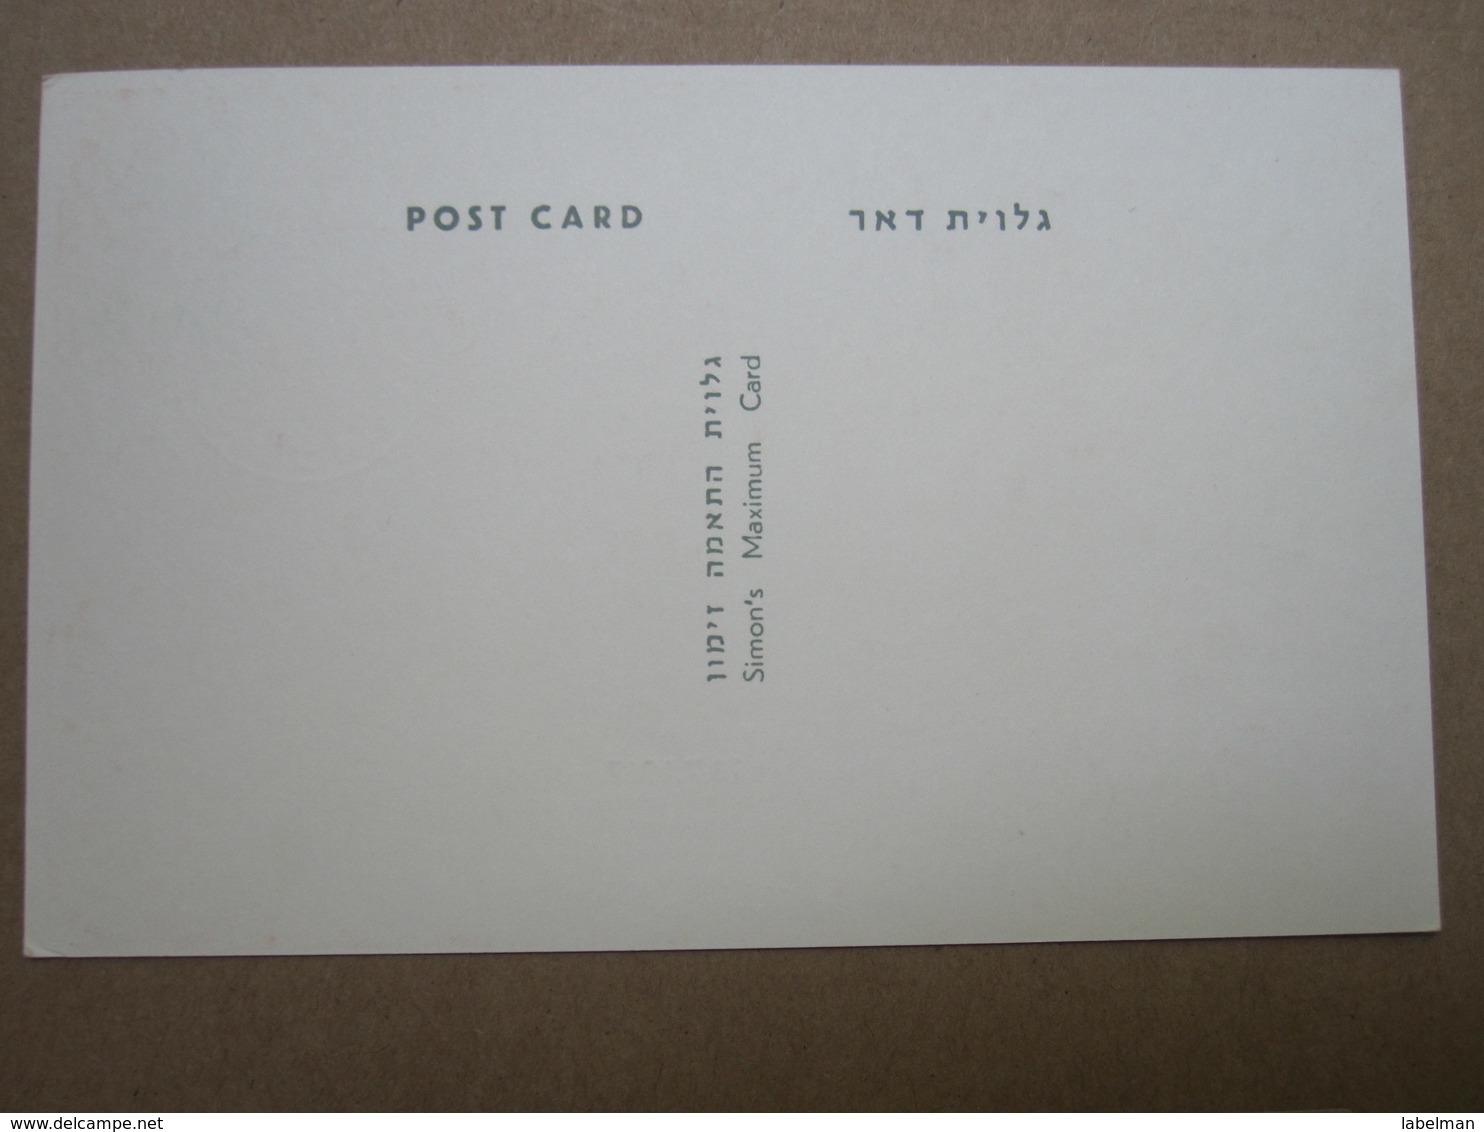 1967 POO FIRST DAY POST OFFICE OPENING NABLUS JORDAN PALESTINE ISRAEL MILITARY ADMINISTRATION MAXIMUM CARD COVER CACHET - Covers & Documents